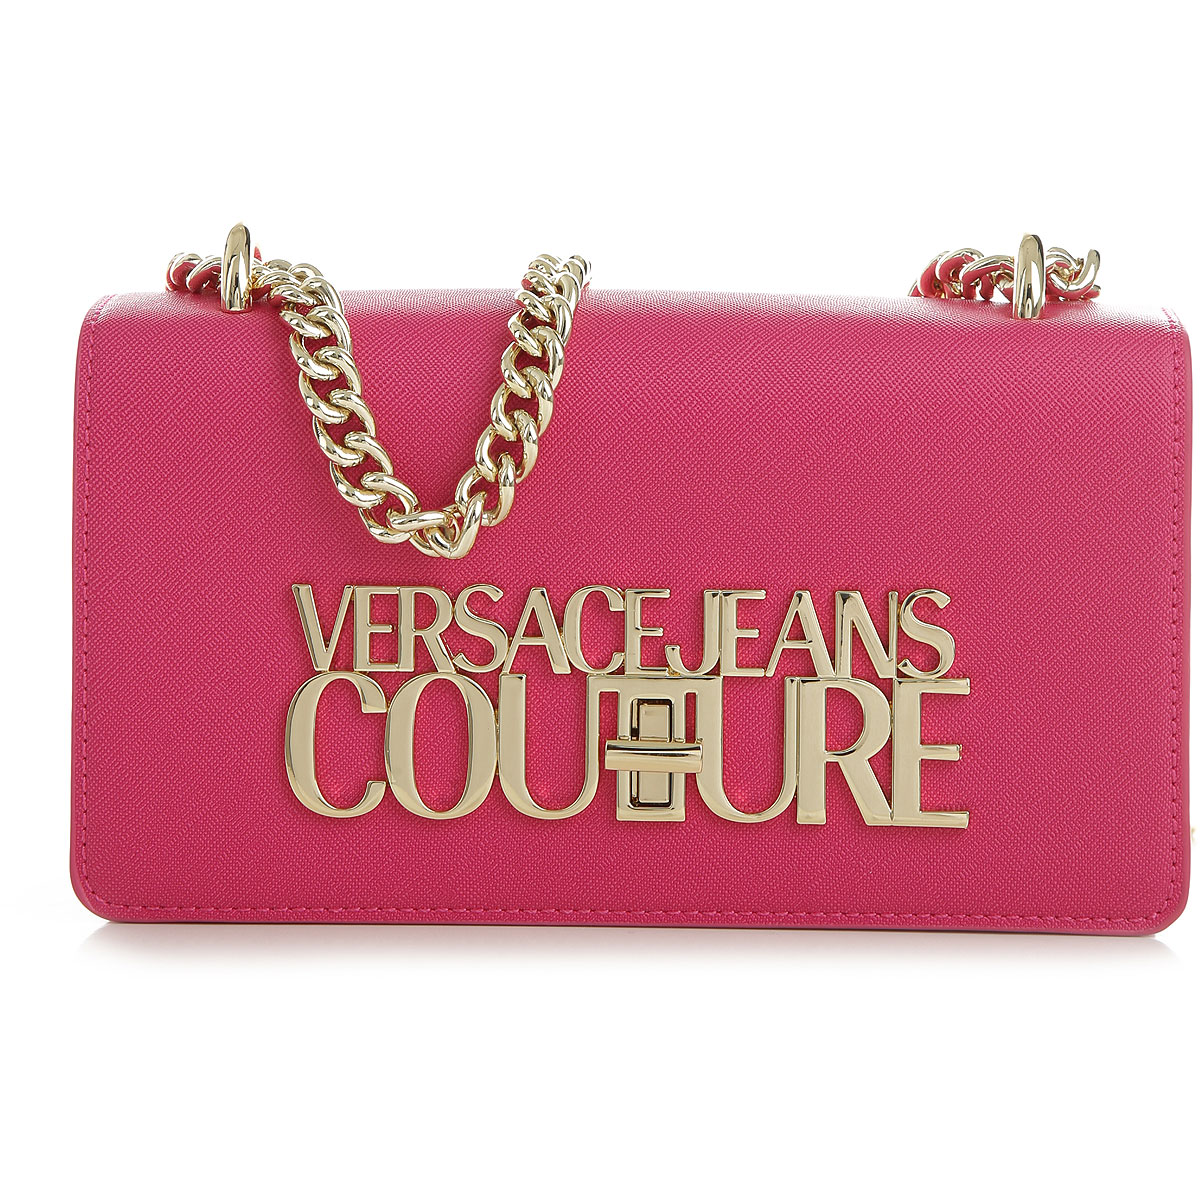 Versace Jeans Couture Mini Bag in Pink